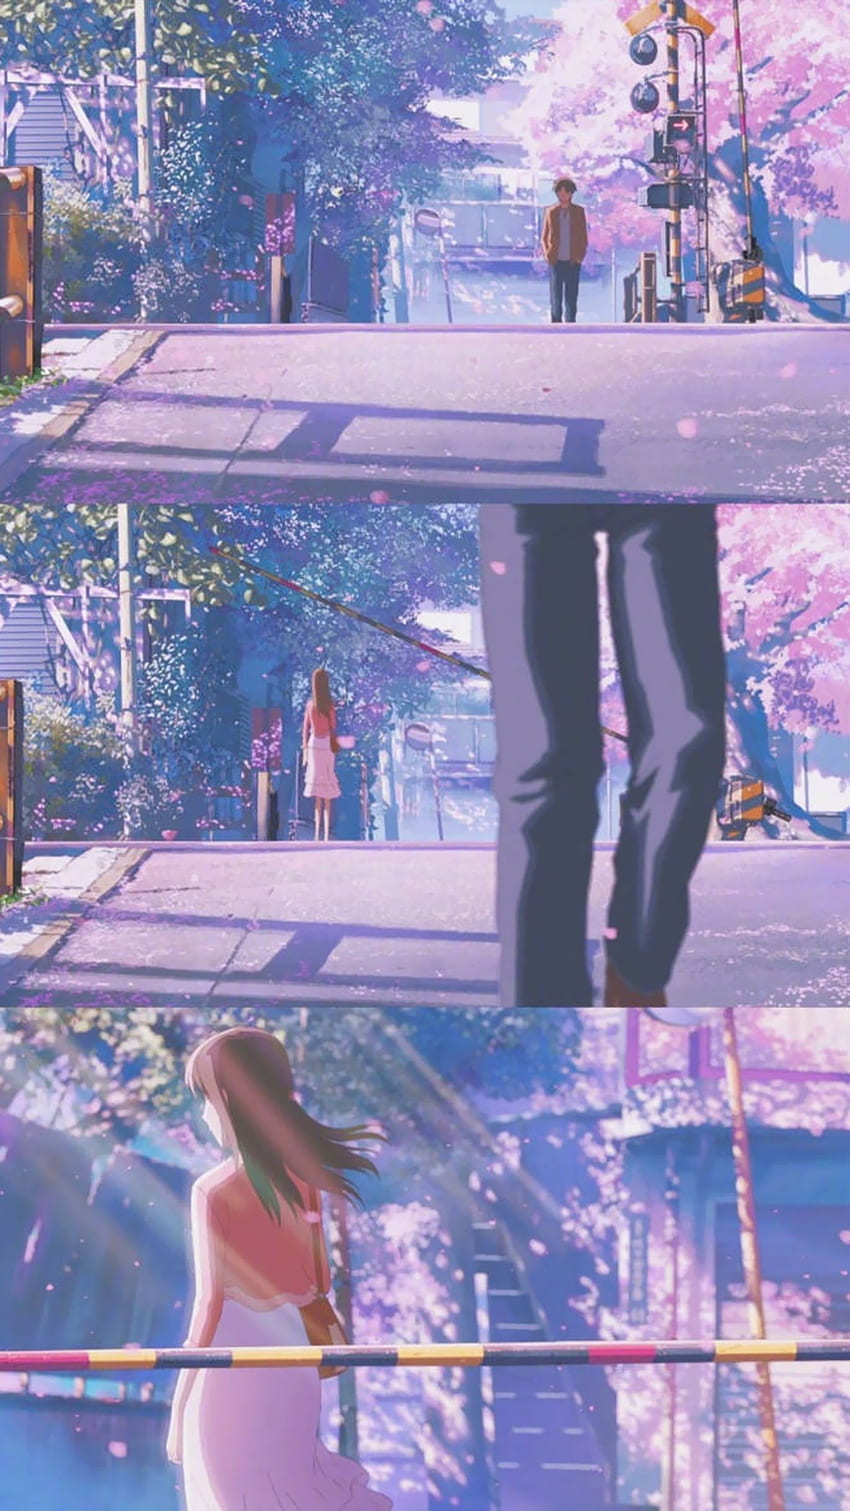 You guys asked for wallpapers from 5 Centimeters Per Second here are  some 8k UHD stills from the movie  ranime